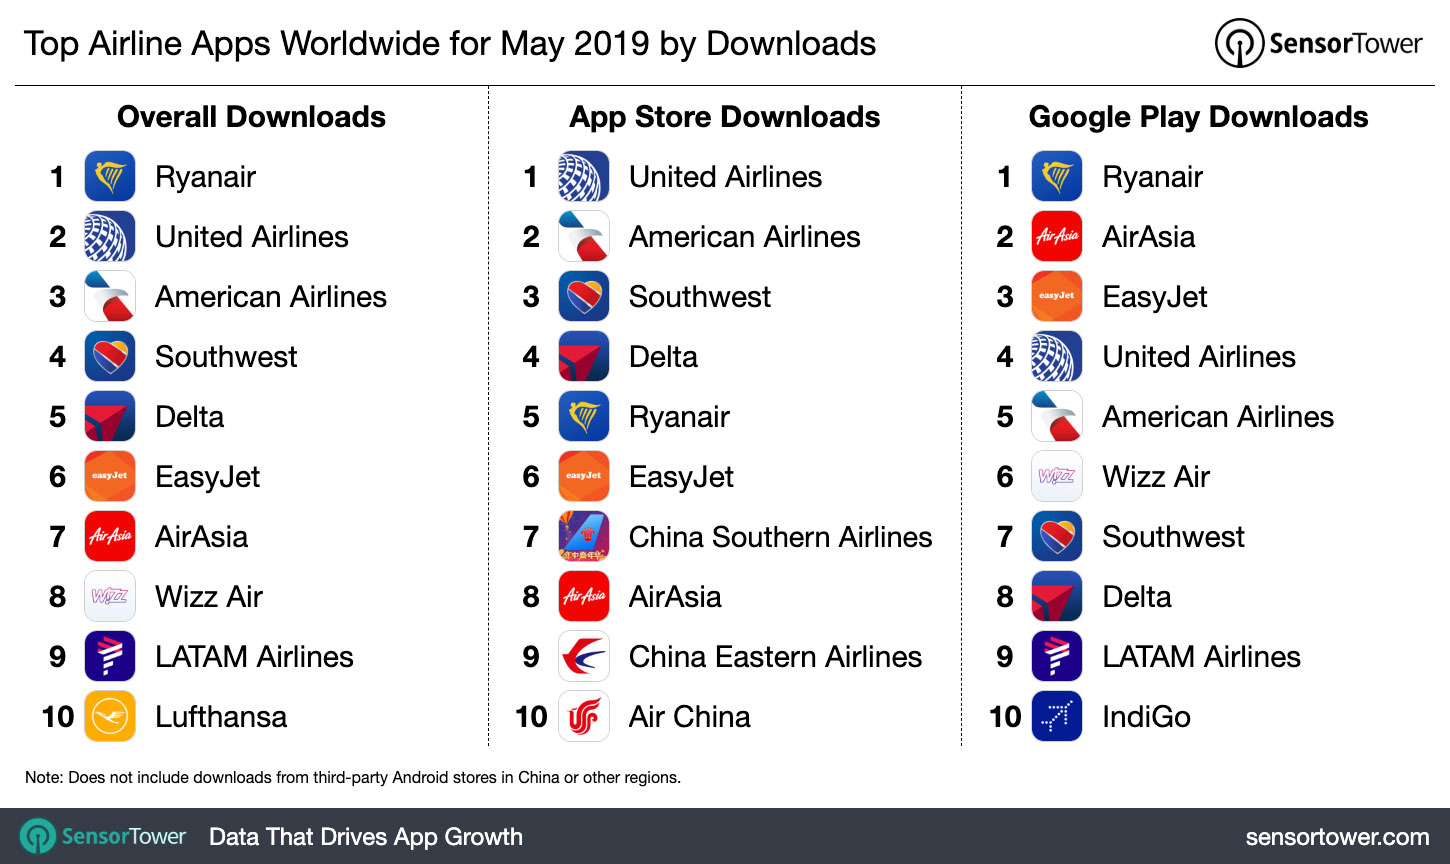 Top Airline Apps Worldwide for May 2019 by Downloads